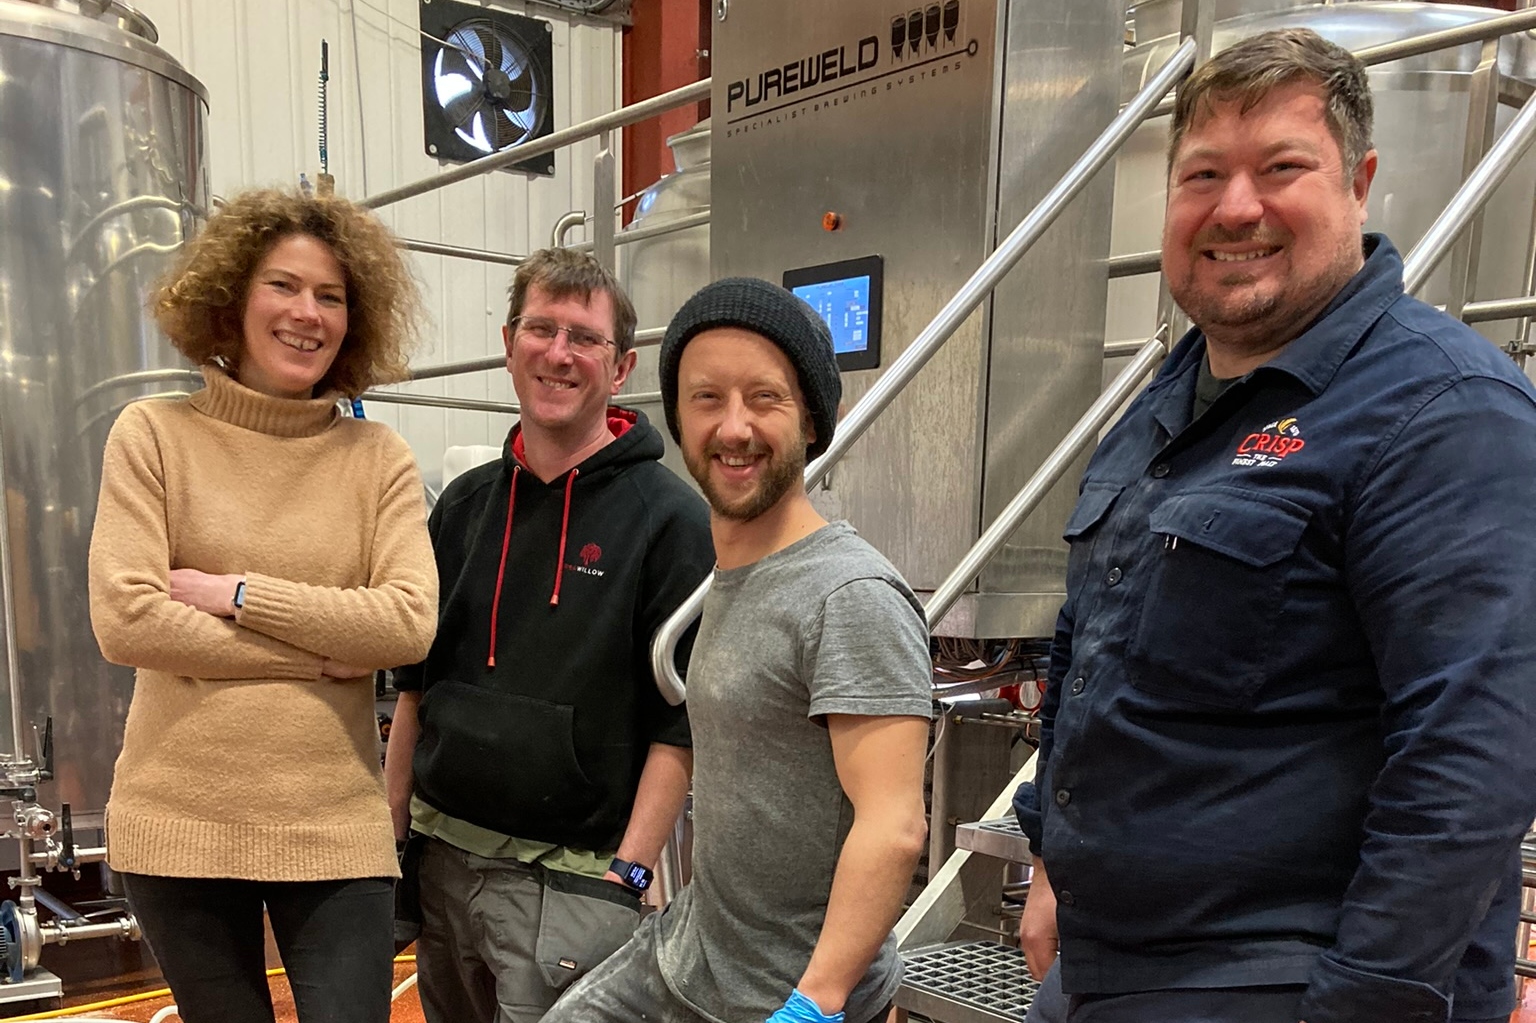 The Redwillow Brewery team that worked on the Crisp Malt beer collab